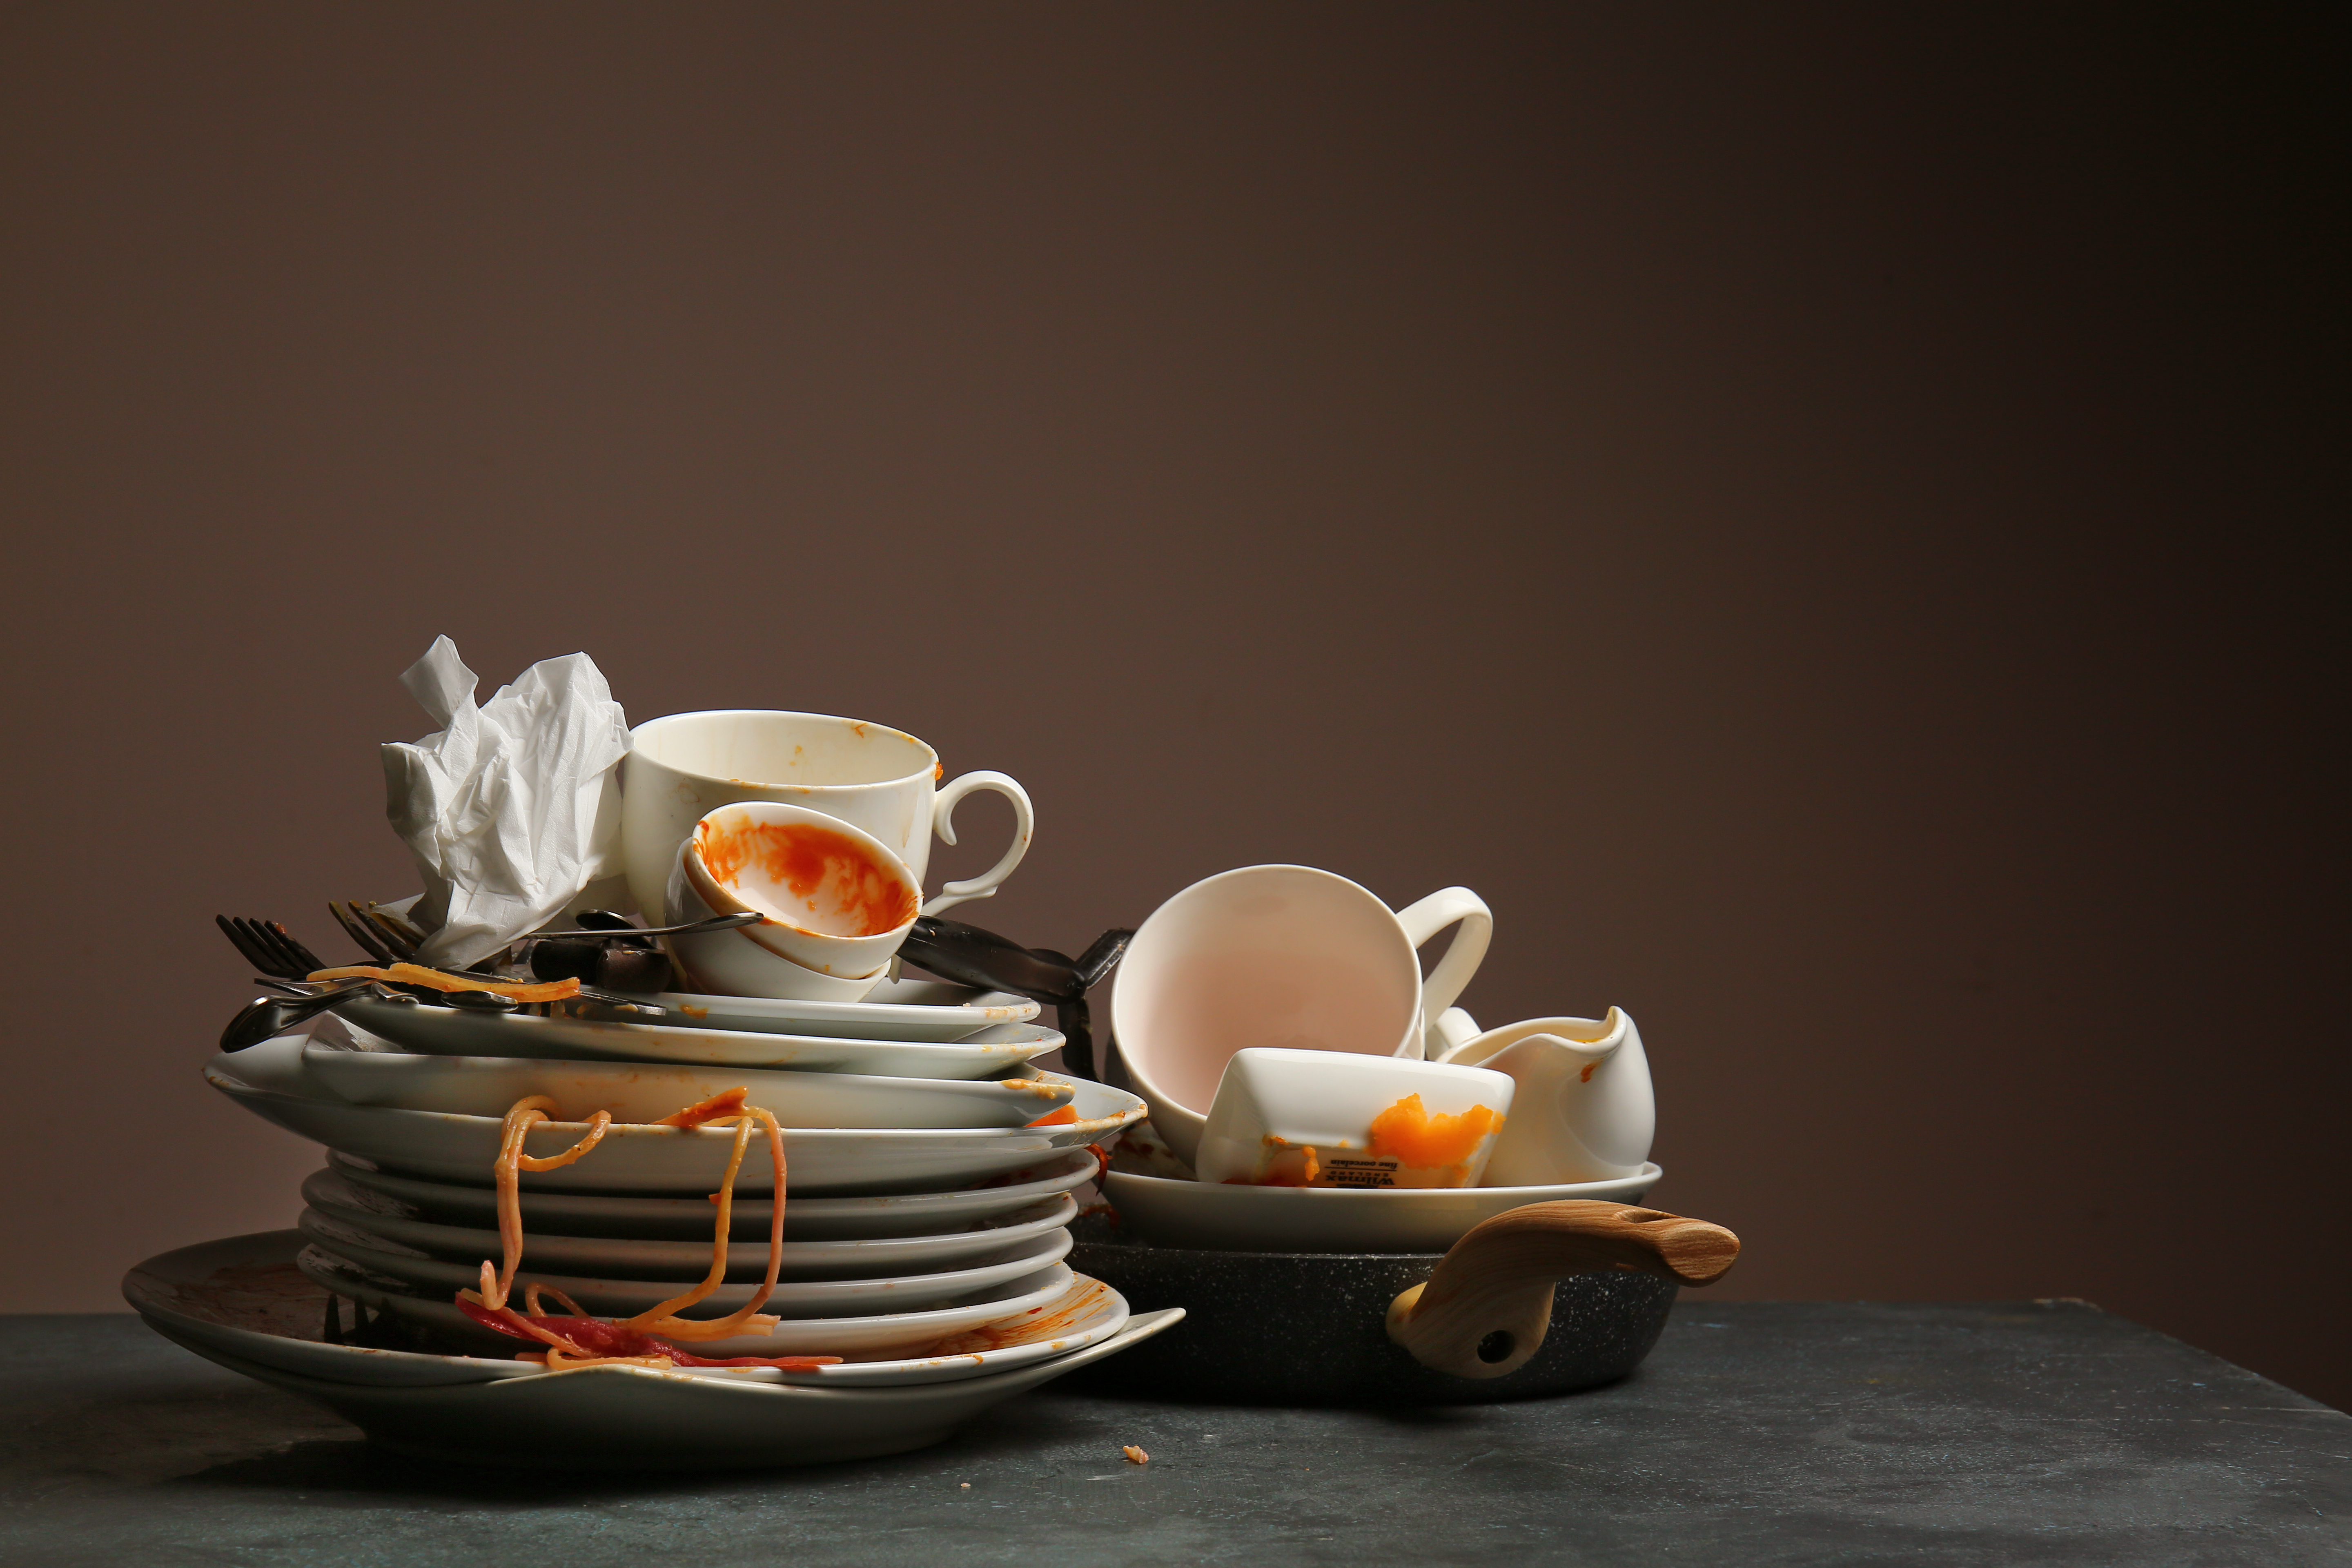 A pile of dirty dishes with a paper towel on top of them | Source: Shutterstock